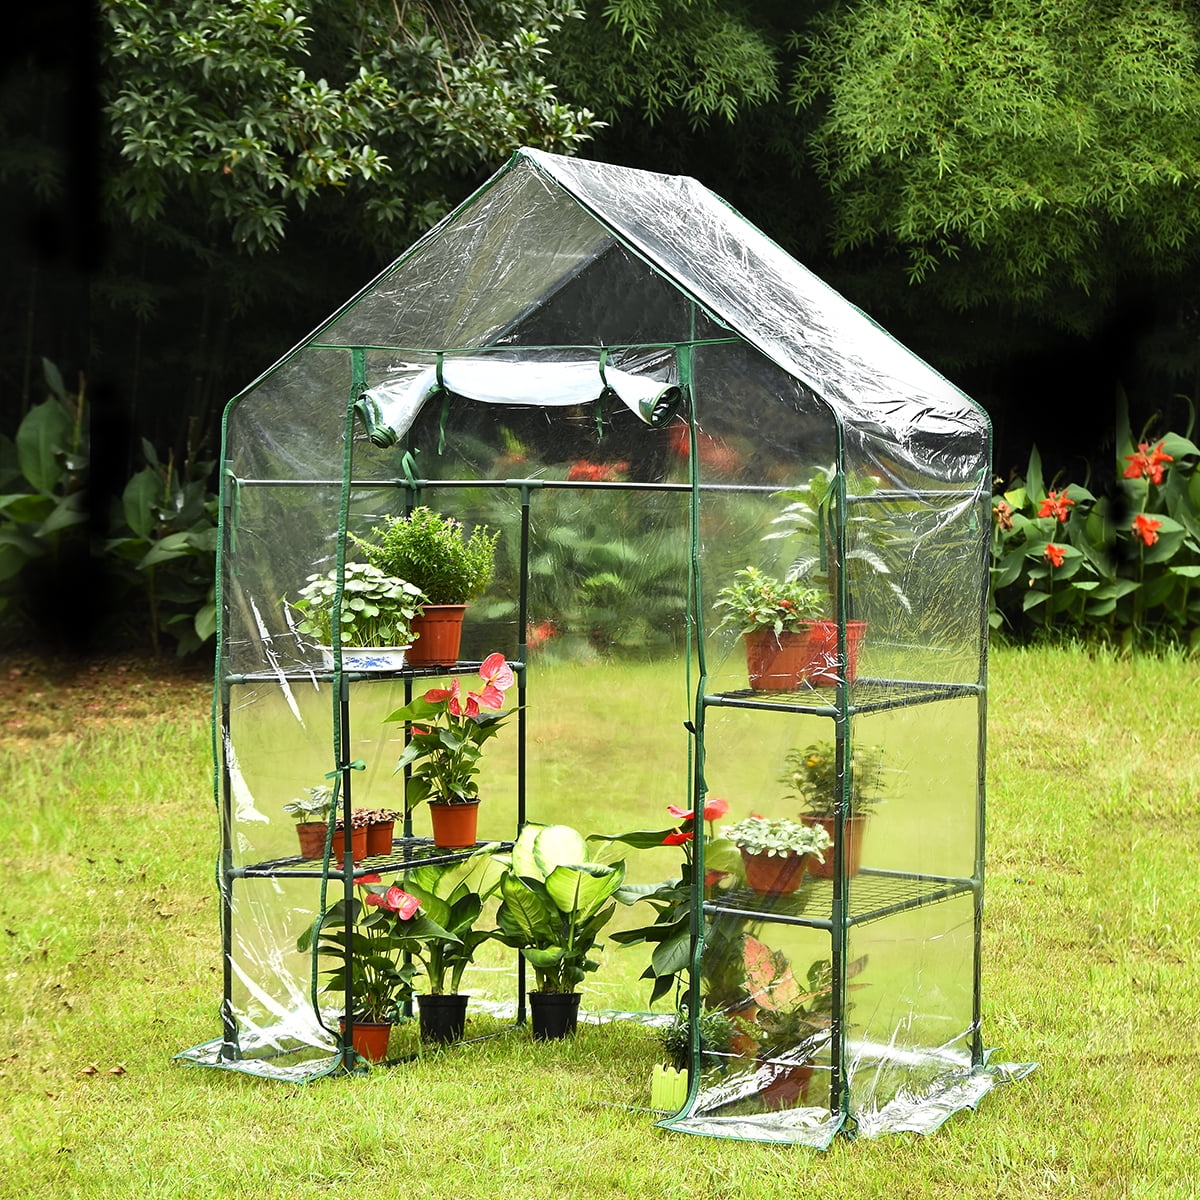 Large Walk-in Greenhouse With PE Cover 57 L x 57 W x 77 H 3 Tier 8 Shelves,Window Version and Roll-Up Zipper Door Waterproof Cloche Portable Green house,Outdoor Gardening Organic Greenhouse